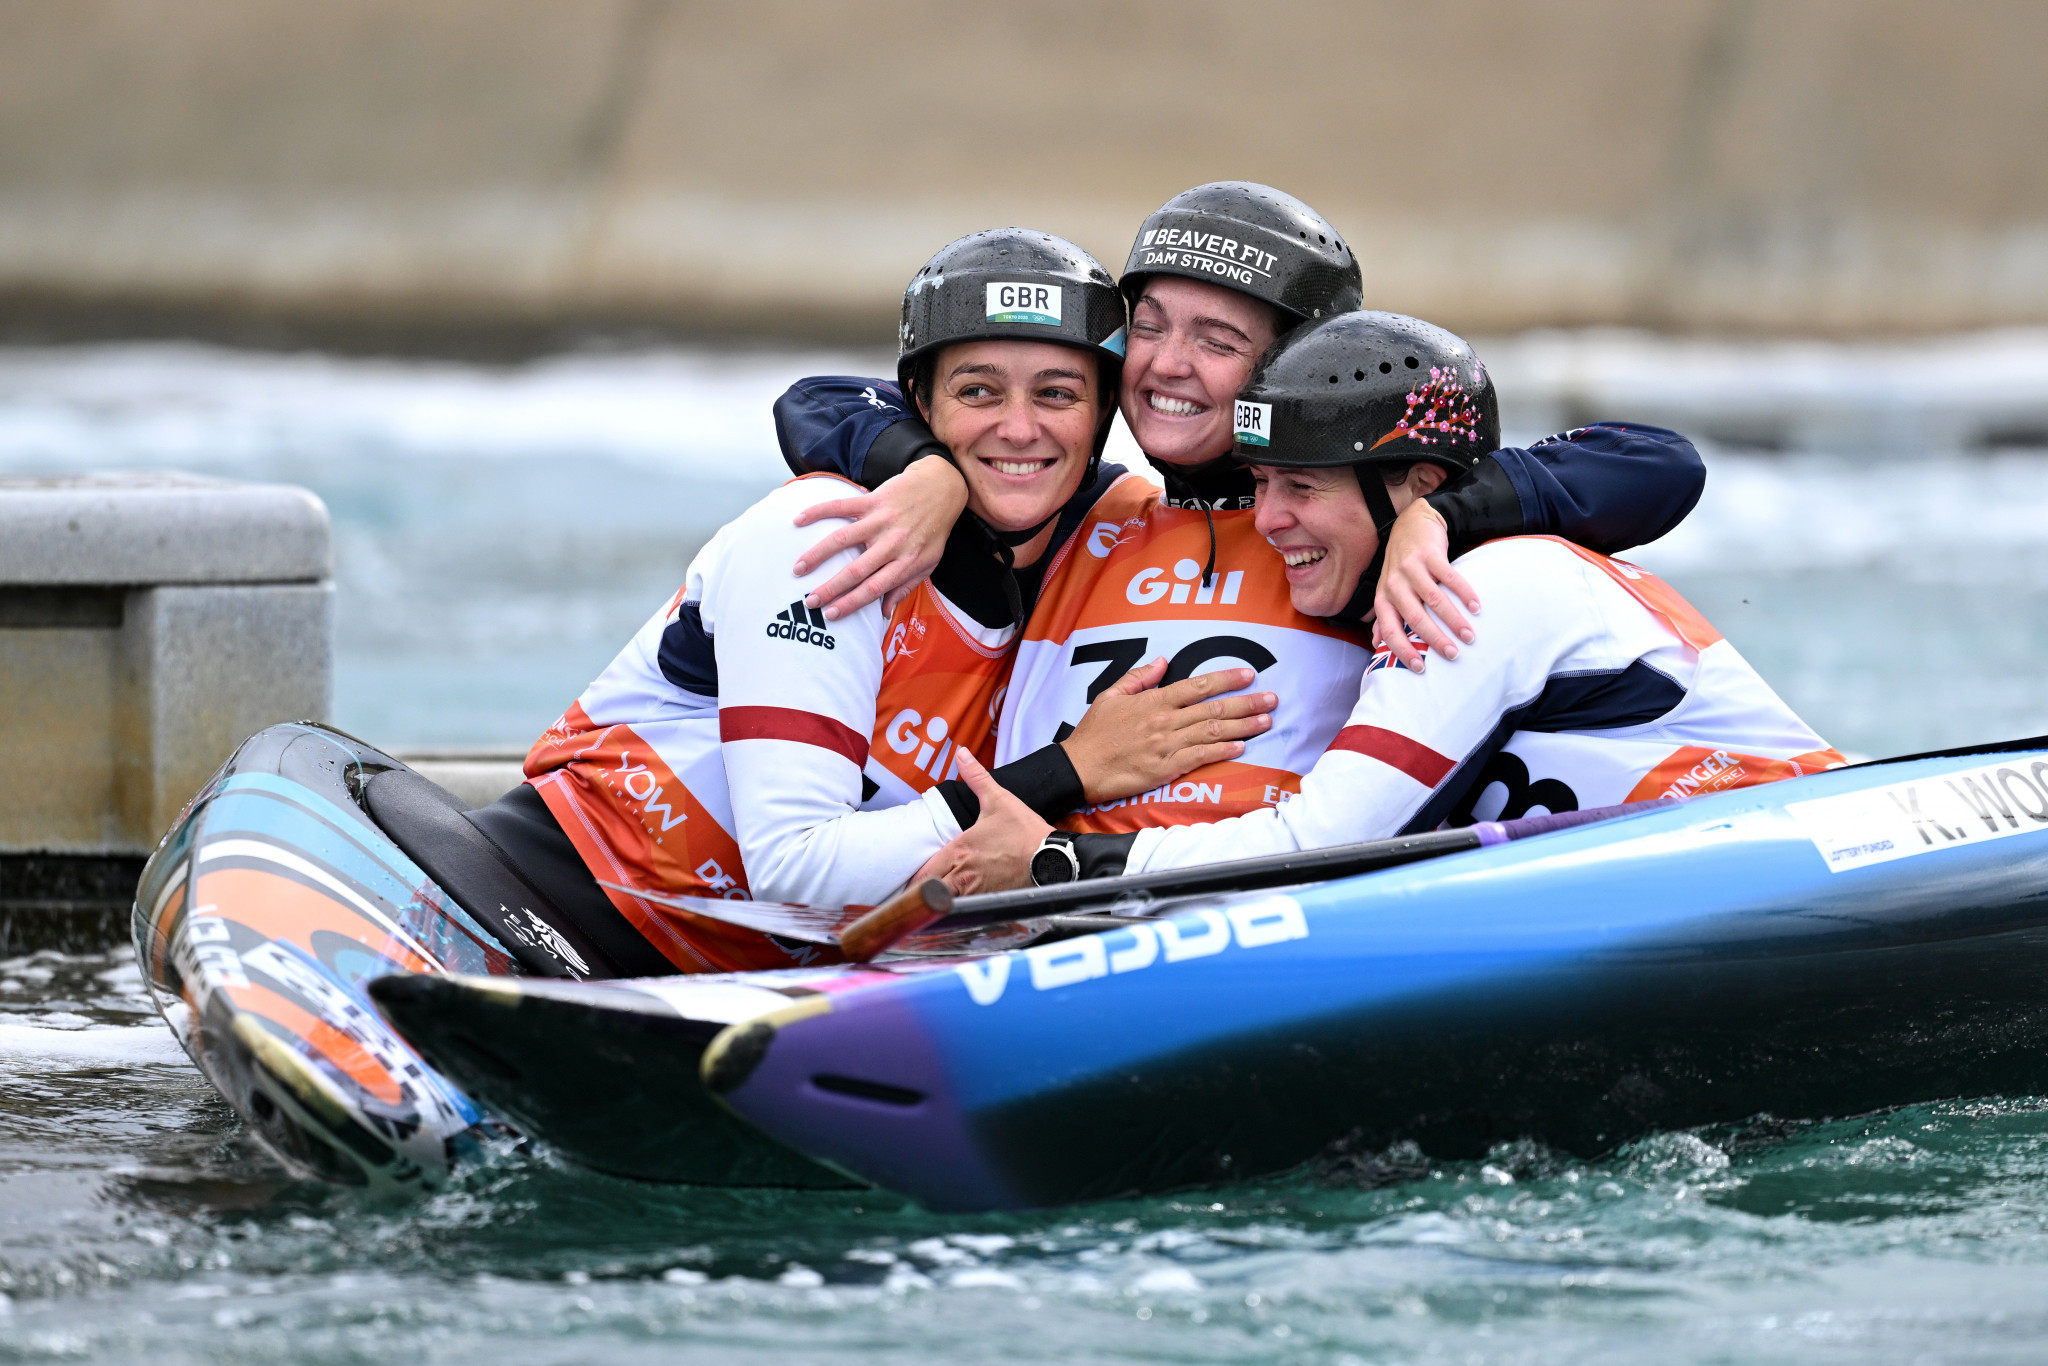 Britain among team winners on first day of ICF Canoe Slalom World Championships